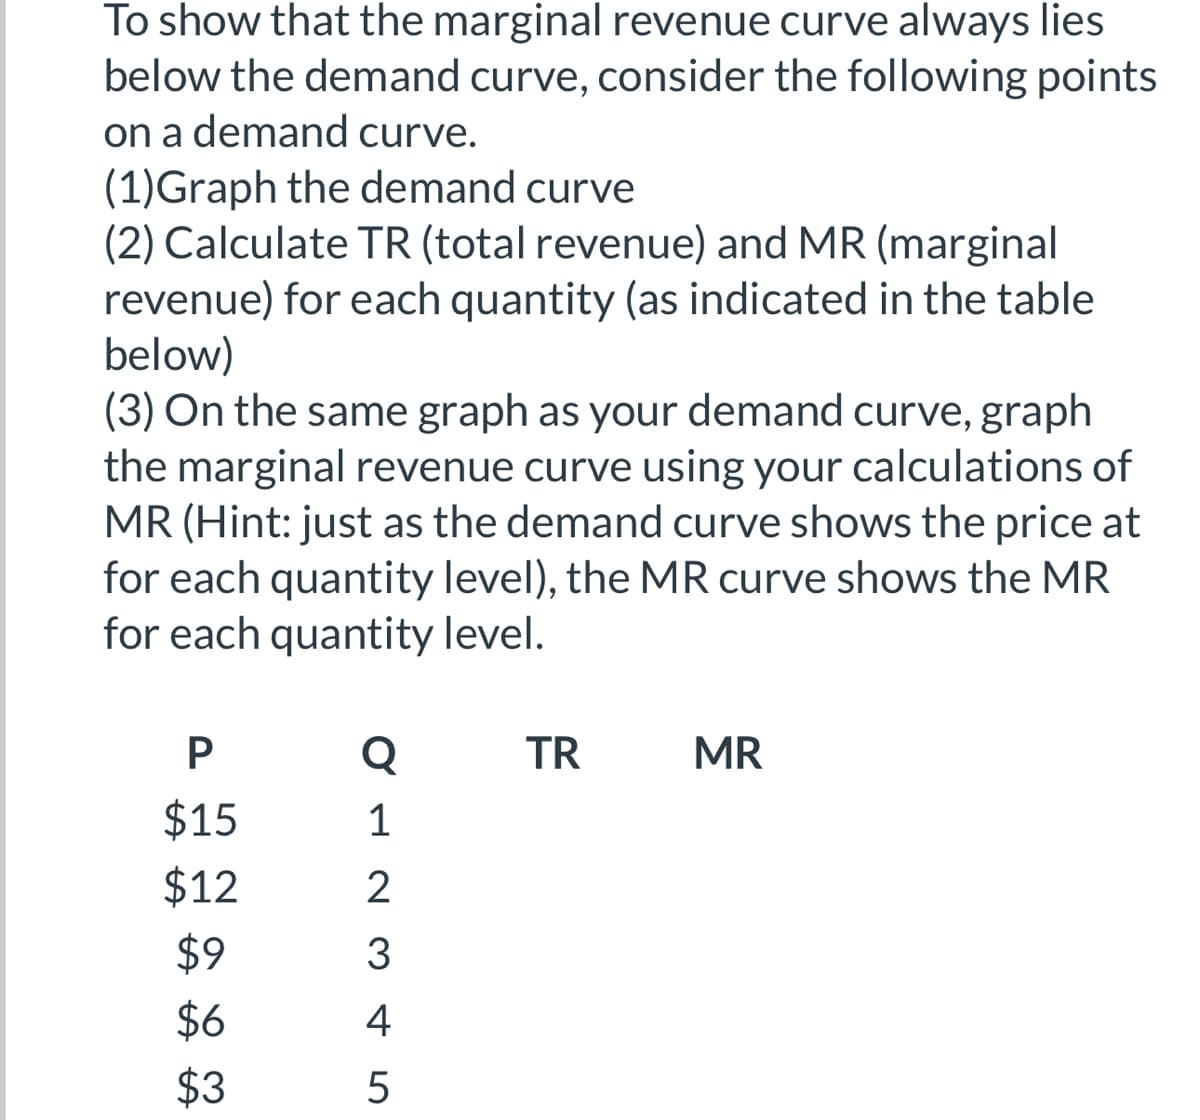 To show that the marginal revenue curve always lies
below the demand curve, consider the following points
on a demand curve.
(1) Graph the demand curve
(2) Calculate TR (total revenue) and MR (marginal
revenue) for each quantity (as indicated in the table
below)
(3) On the same graph as your demand curve, graph
the marginal revenue curve using your calculations of
MR (Hint: just as the demand curve shows the price at
for each quantity level), the MR curve shows the MR
for each quantity level.
P
$15
$12
$9
$6
$3
Q
1
2
3
345
4
TR
MR